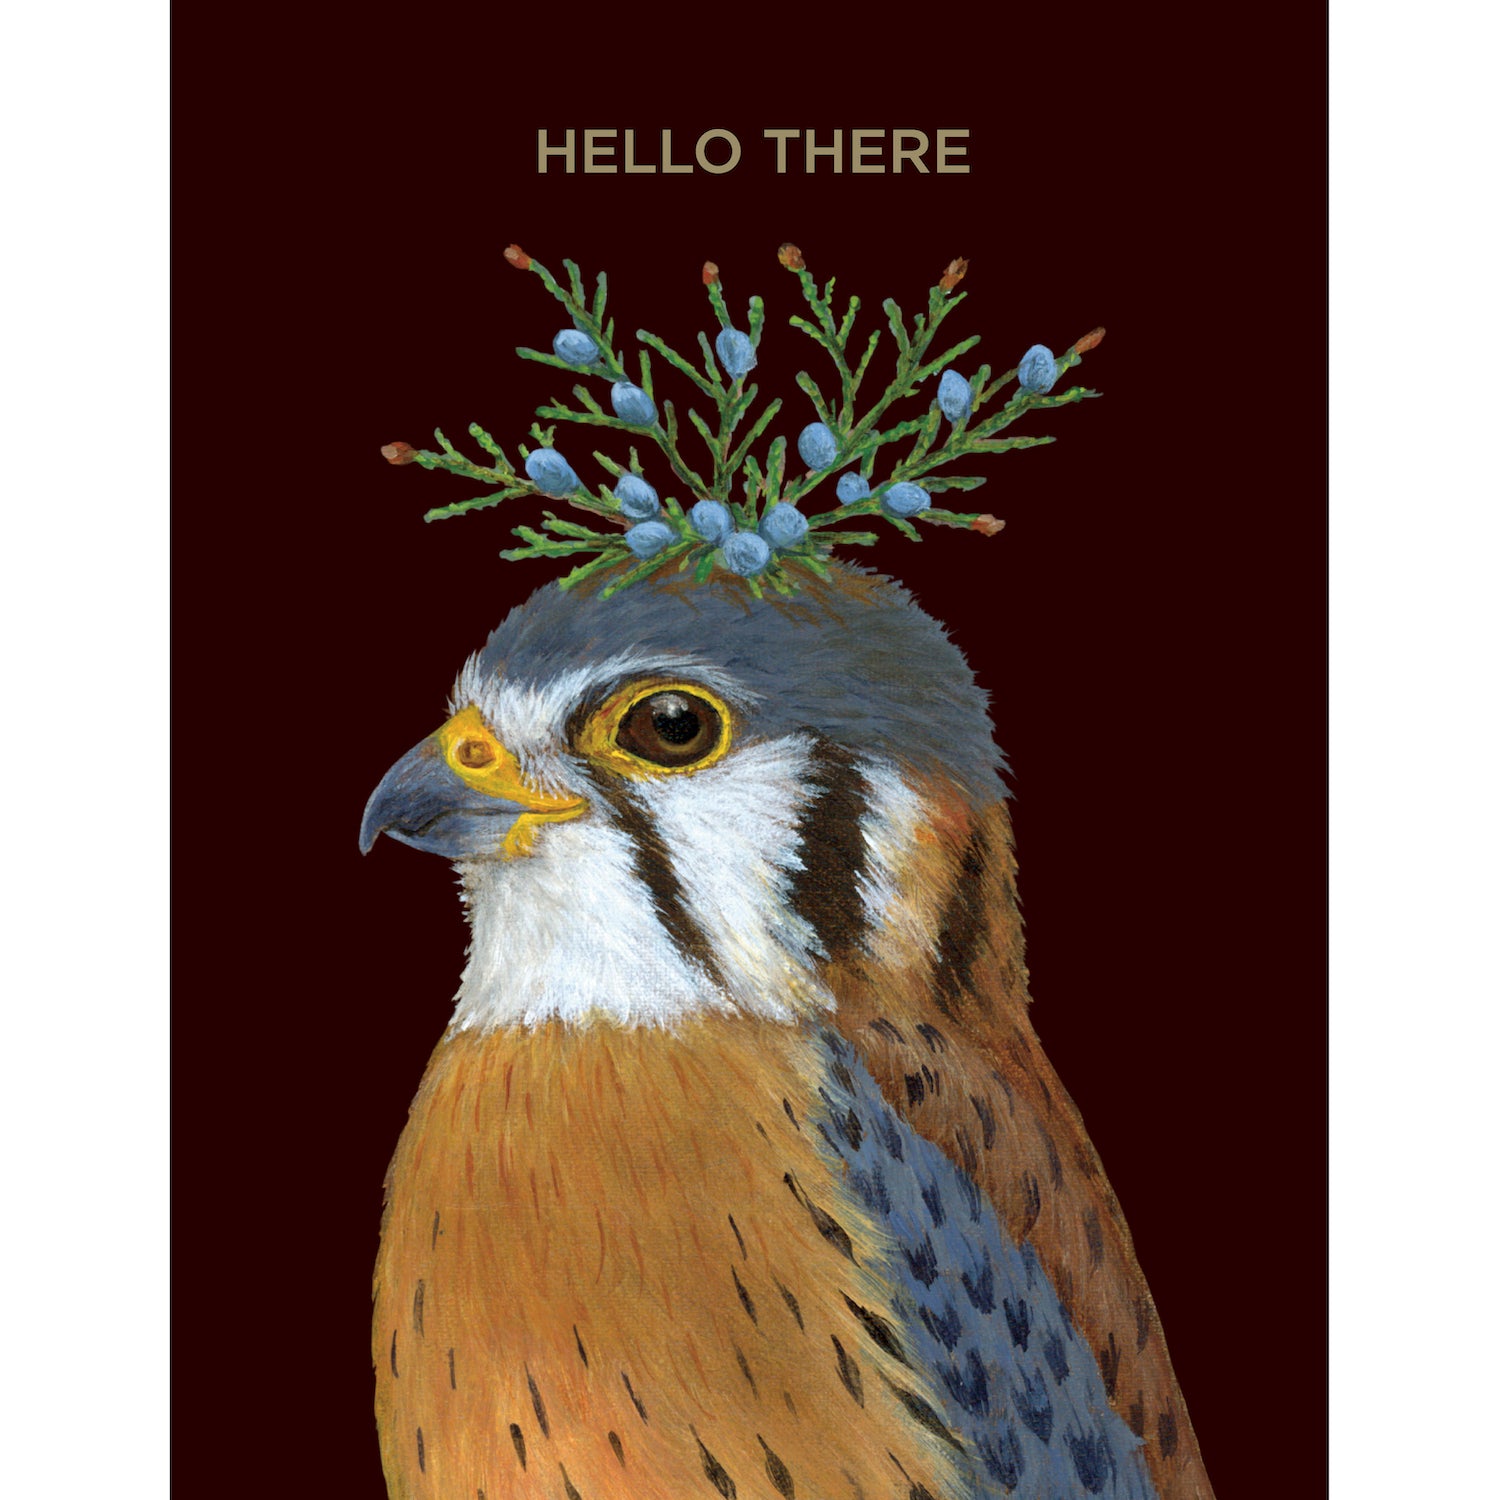 A Hello There, Kestrel Card with an image of a falcon wearing a crown of flowers, created by artist Vicki Sawyer, from Hester &amp; Cook.